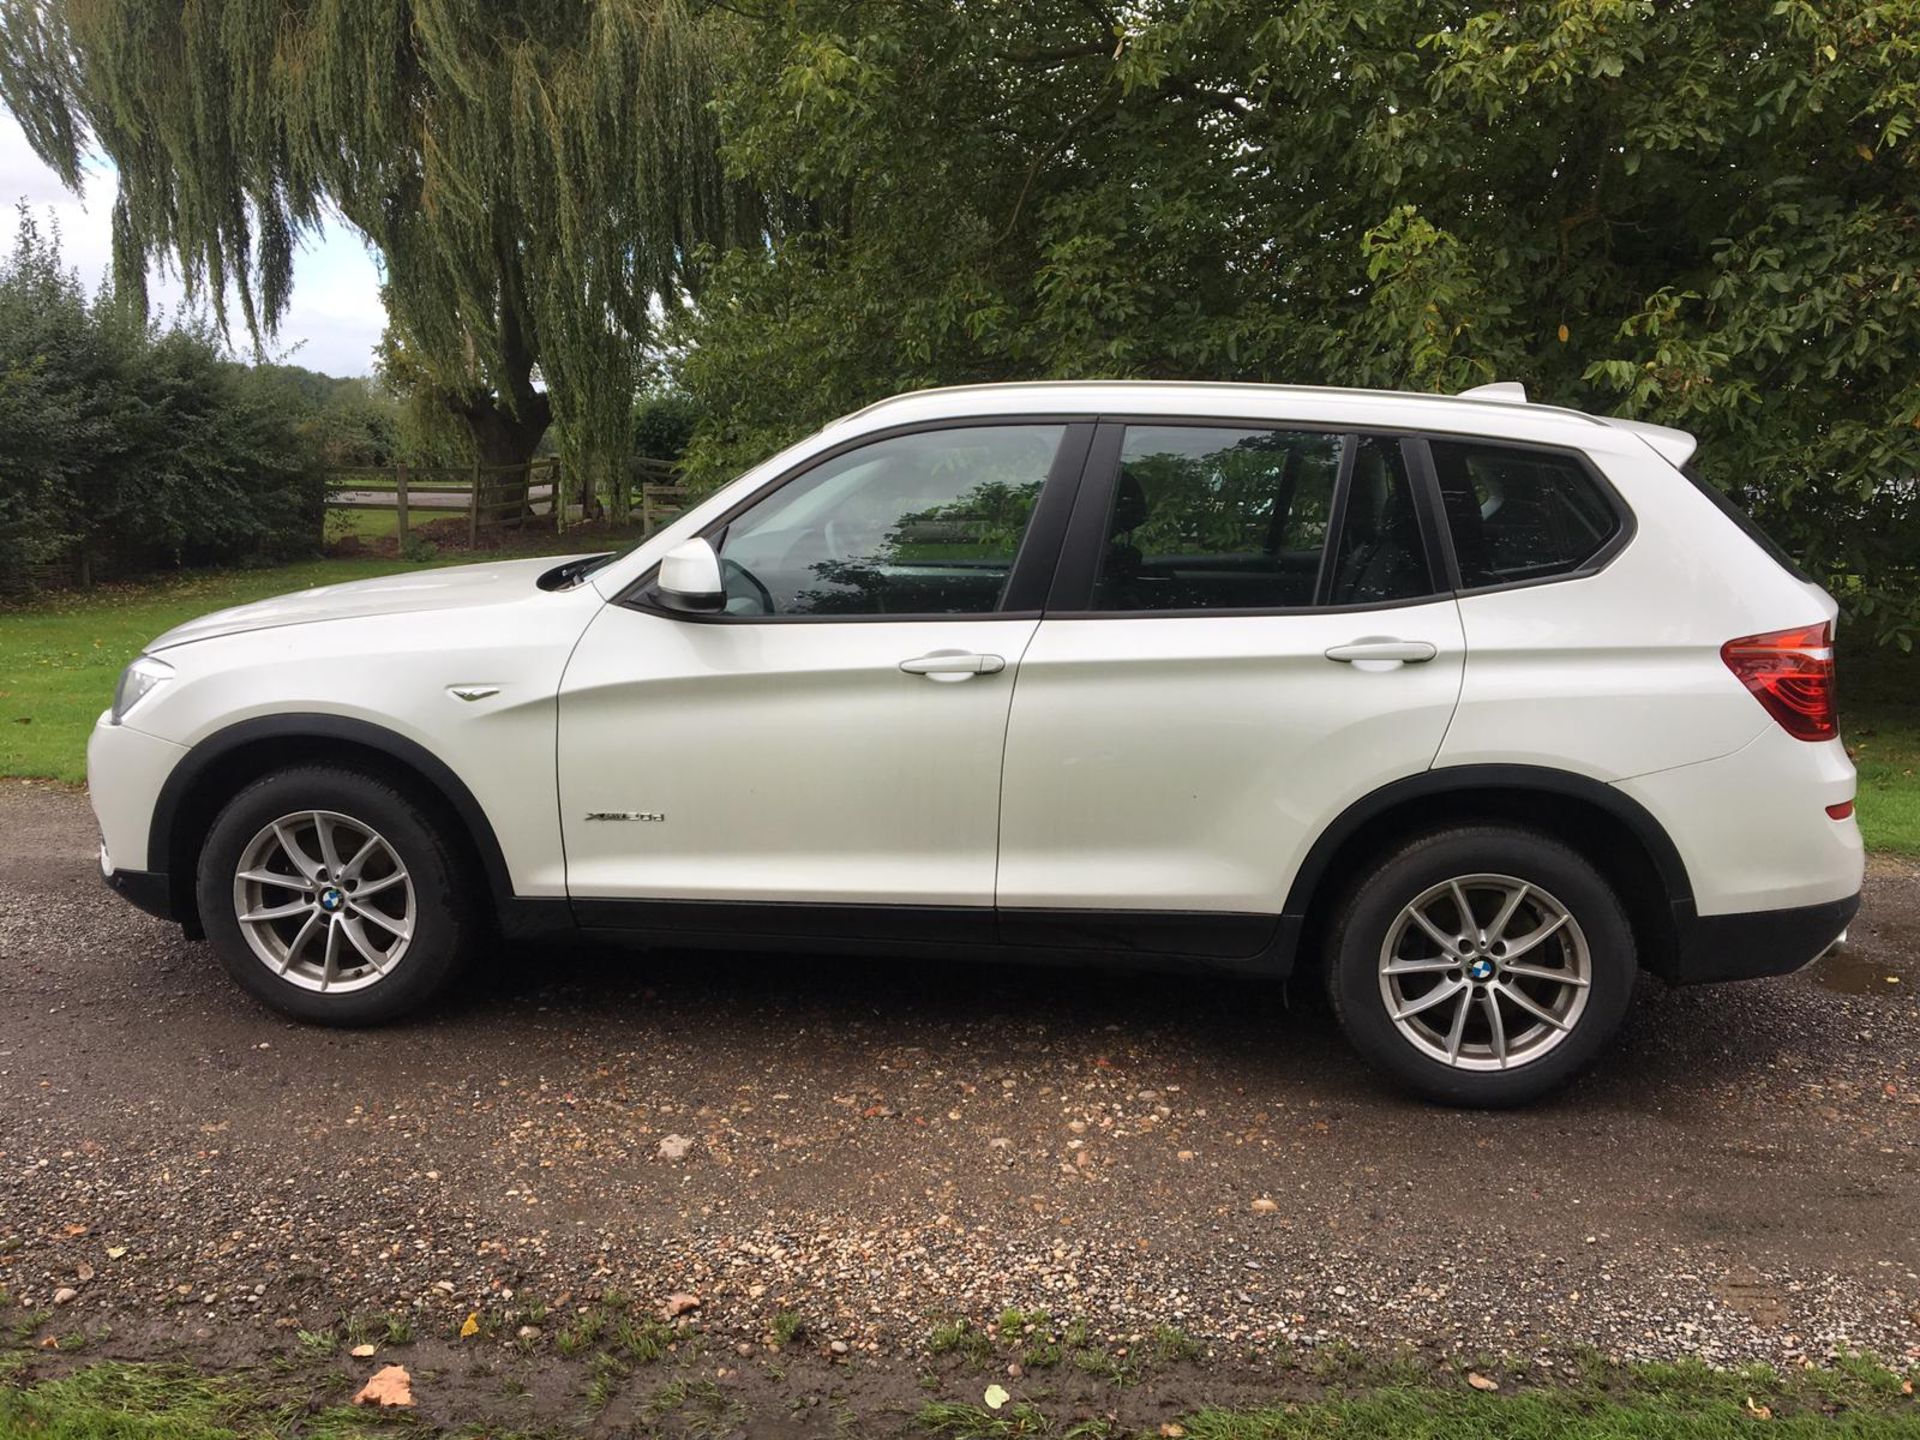 2017/17 REG BMW X3 XDRIVE 20D SE AUTO 2.0 DIESEL WHITE ESTATE, SHOWING 0 FORMER KEEPERS *NO VAT* - Image 4 of 15